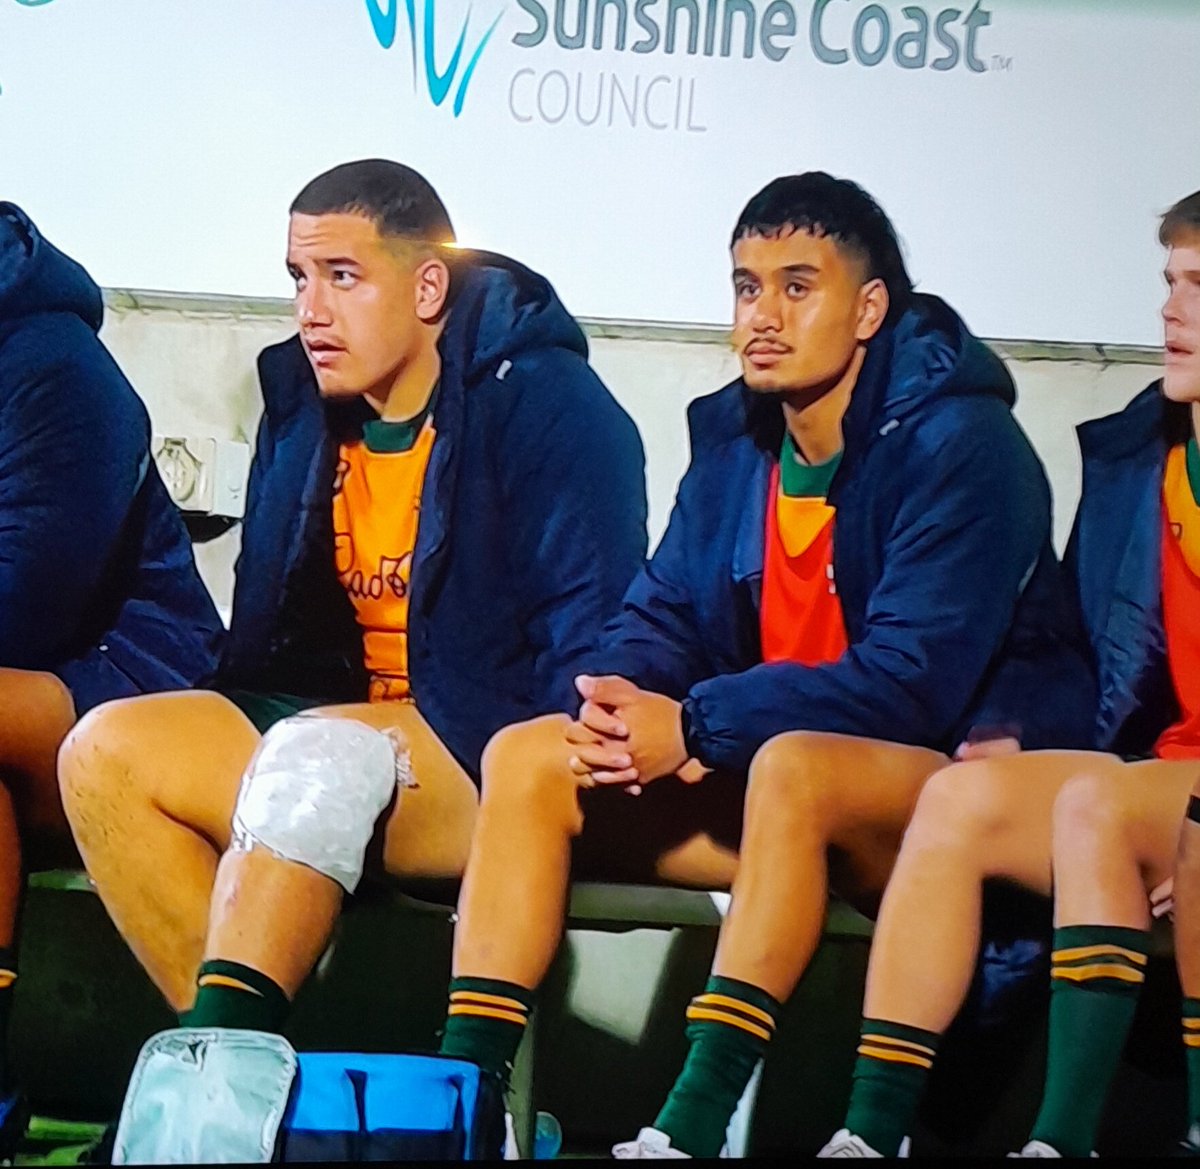 So good to see the pathways working @MelbourneRebels @wallabies 
Hate to see this amazing talent lost to other codes .. 
Over to you @RugbyAU ...
@JacintaAllanMP @RosSpenceMP @Steve_Dimo
📷 @W_Rebels2022